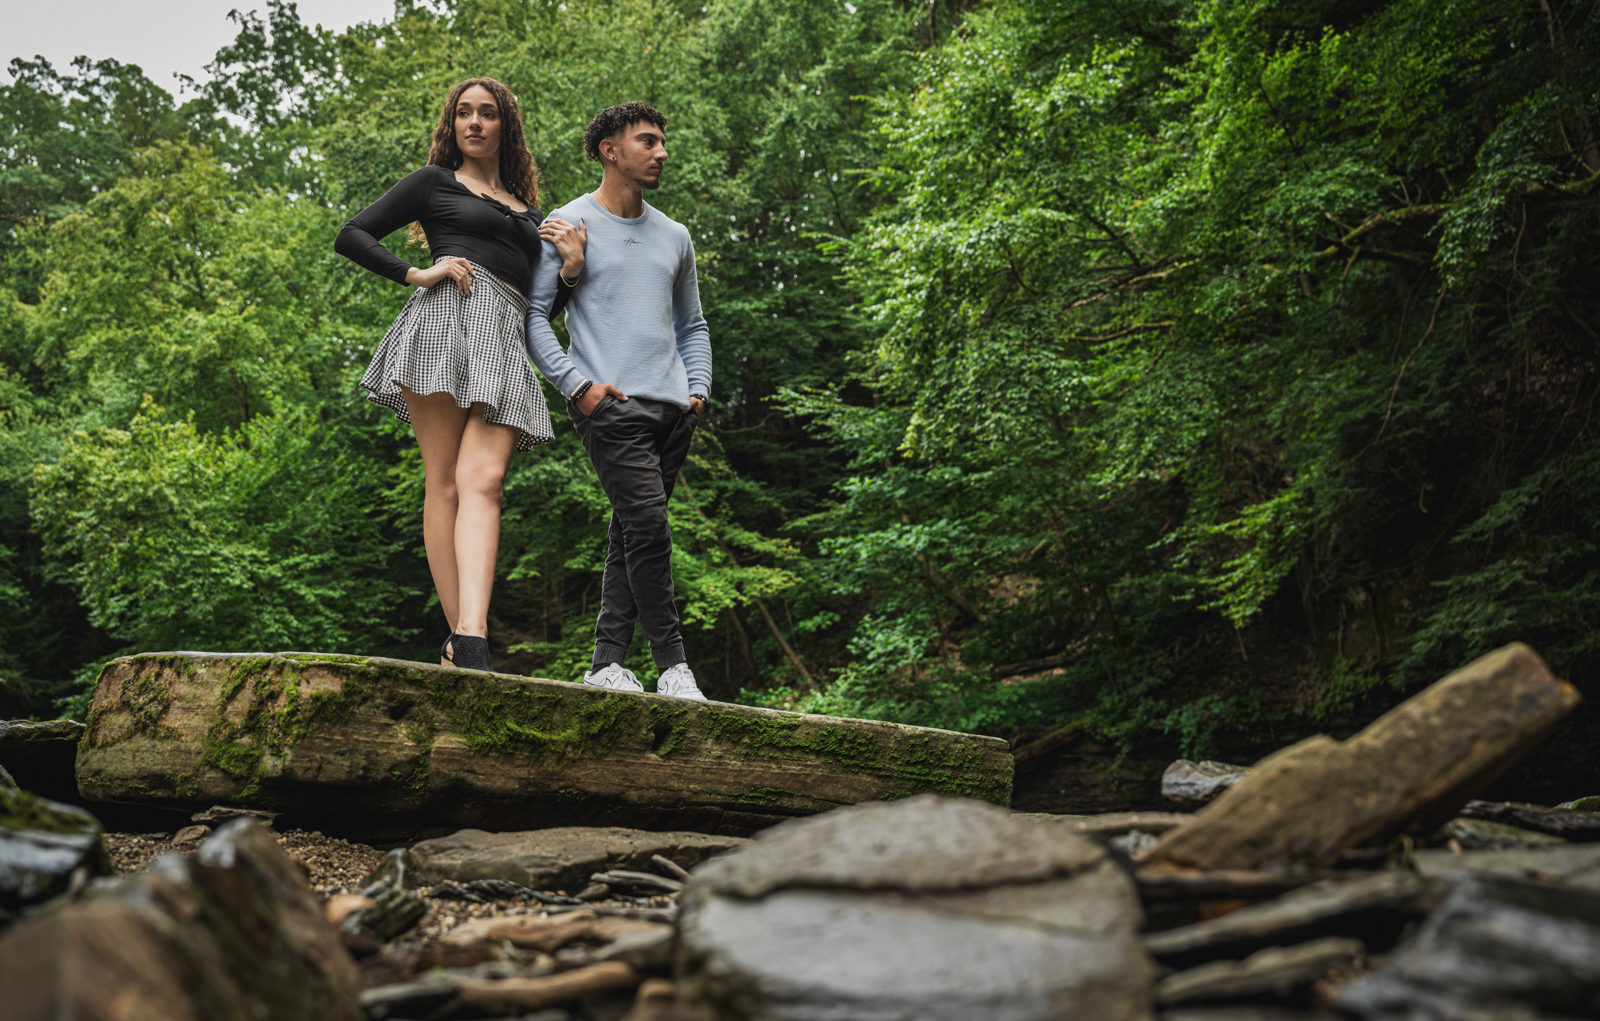 Dee Dee and Josh Engagement Session at Quarry Rock Picnic Area in Bentleyville, Ohio